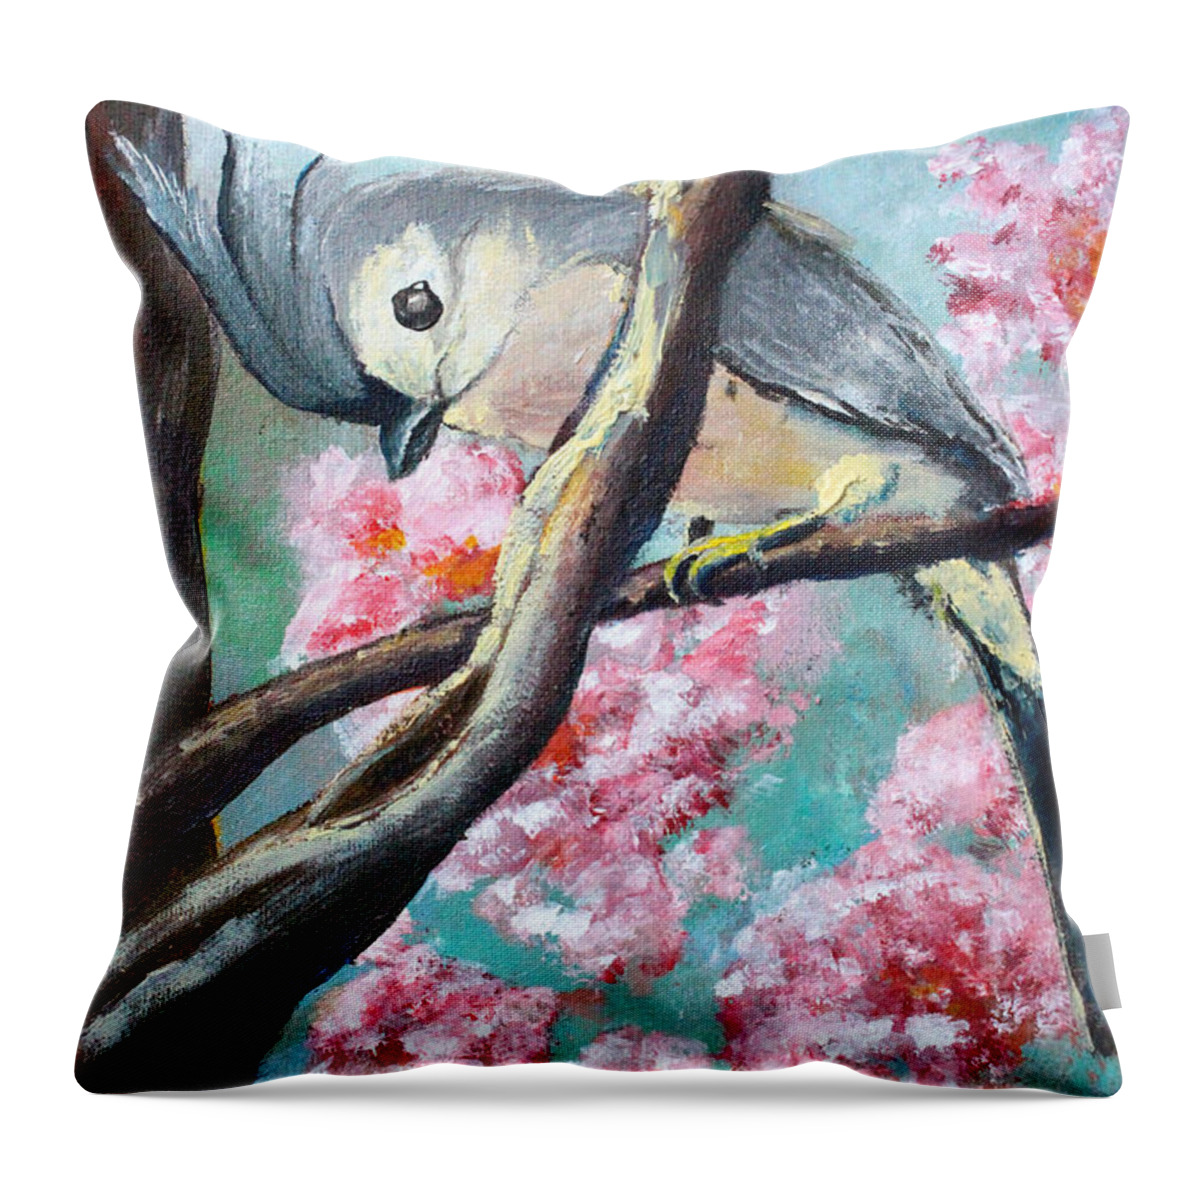 Beautiful Throw Pillow featuring the painting Titmouse by Medea Ioseliani